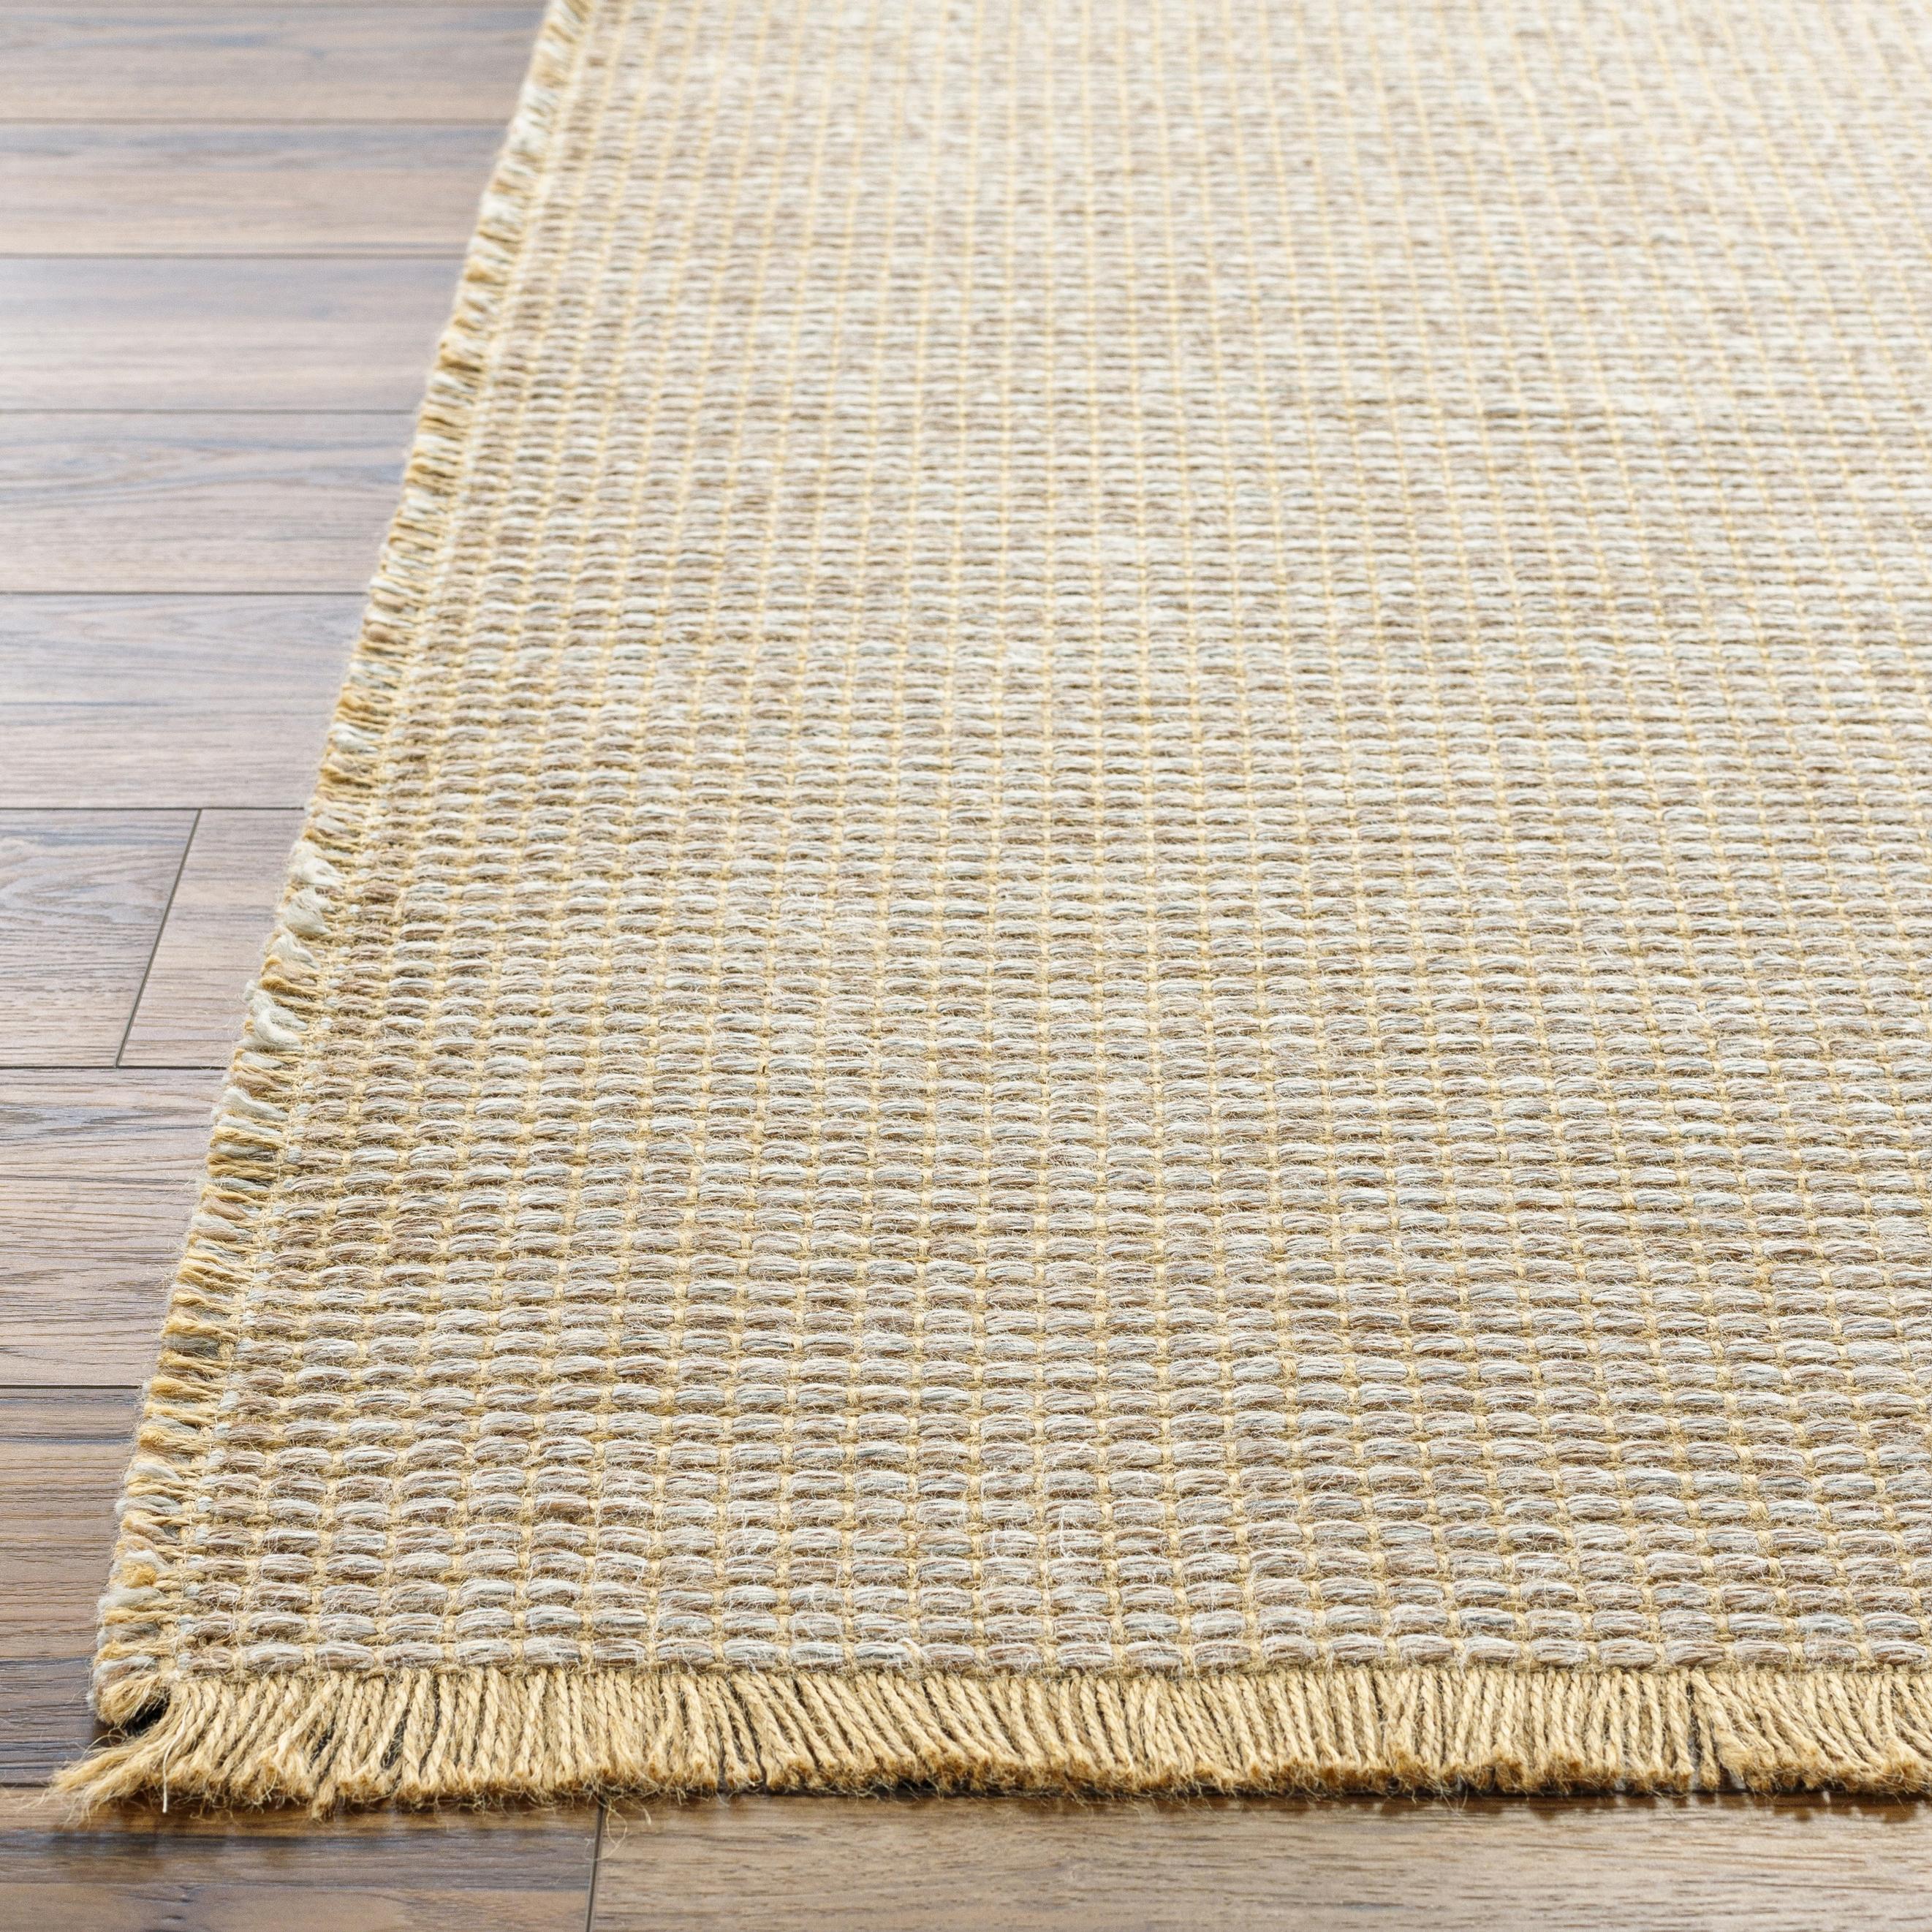 This exquisite Kimi area rug from our Becki Owens x Surya line is the perfect combination of style and comfort. Crafted from a unique blend of polypropylene and jute, this rug features a beautiful stitched design that will bring a touch of elegance to any space. Amethyst Home provides interior design, new home construction design consulting, vintage area rugs, and lighting in the Alpharetta metro area.